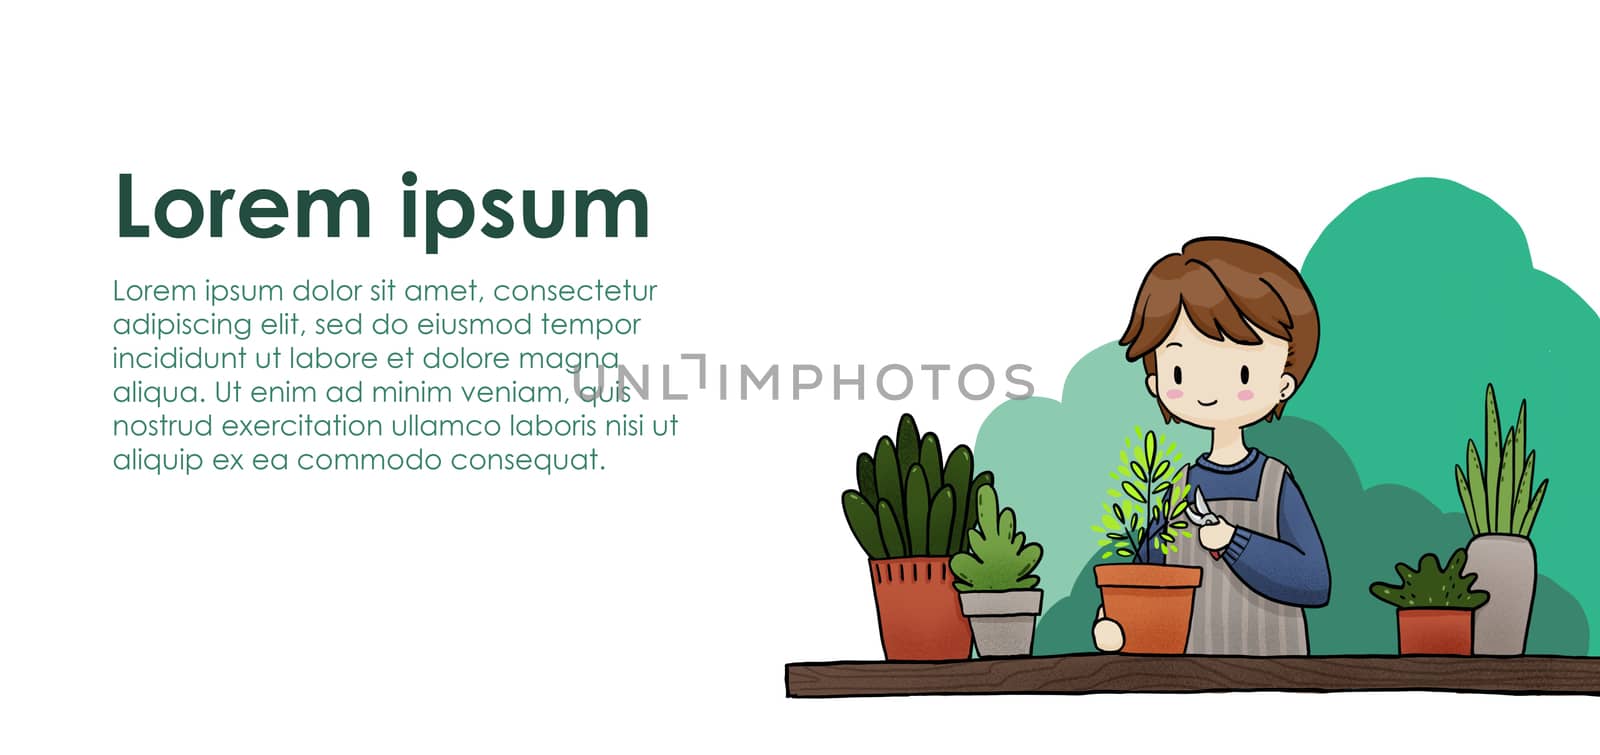 People are pruning branches in pots on a white background, gardening illustrations, holiday activities. Designed for advertising on banners websites. by Ungamrung